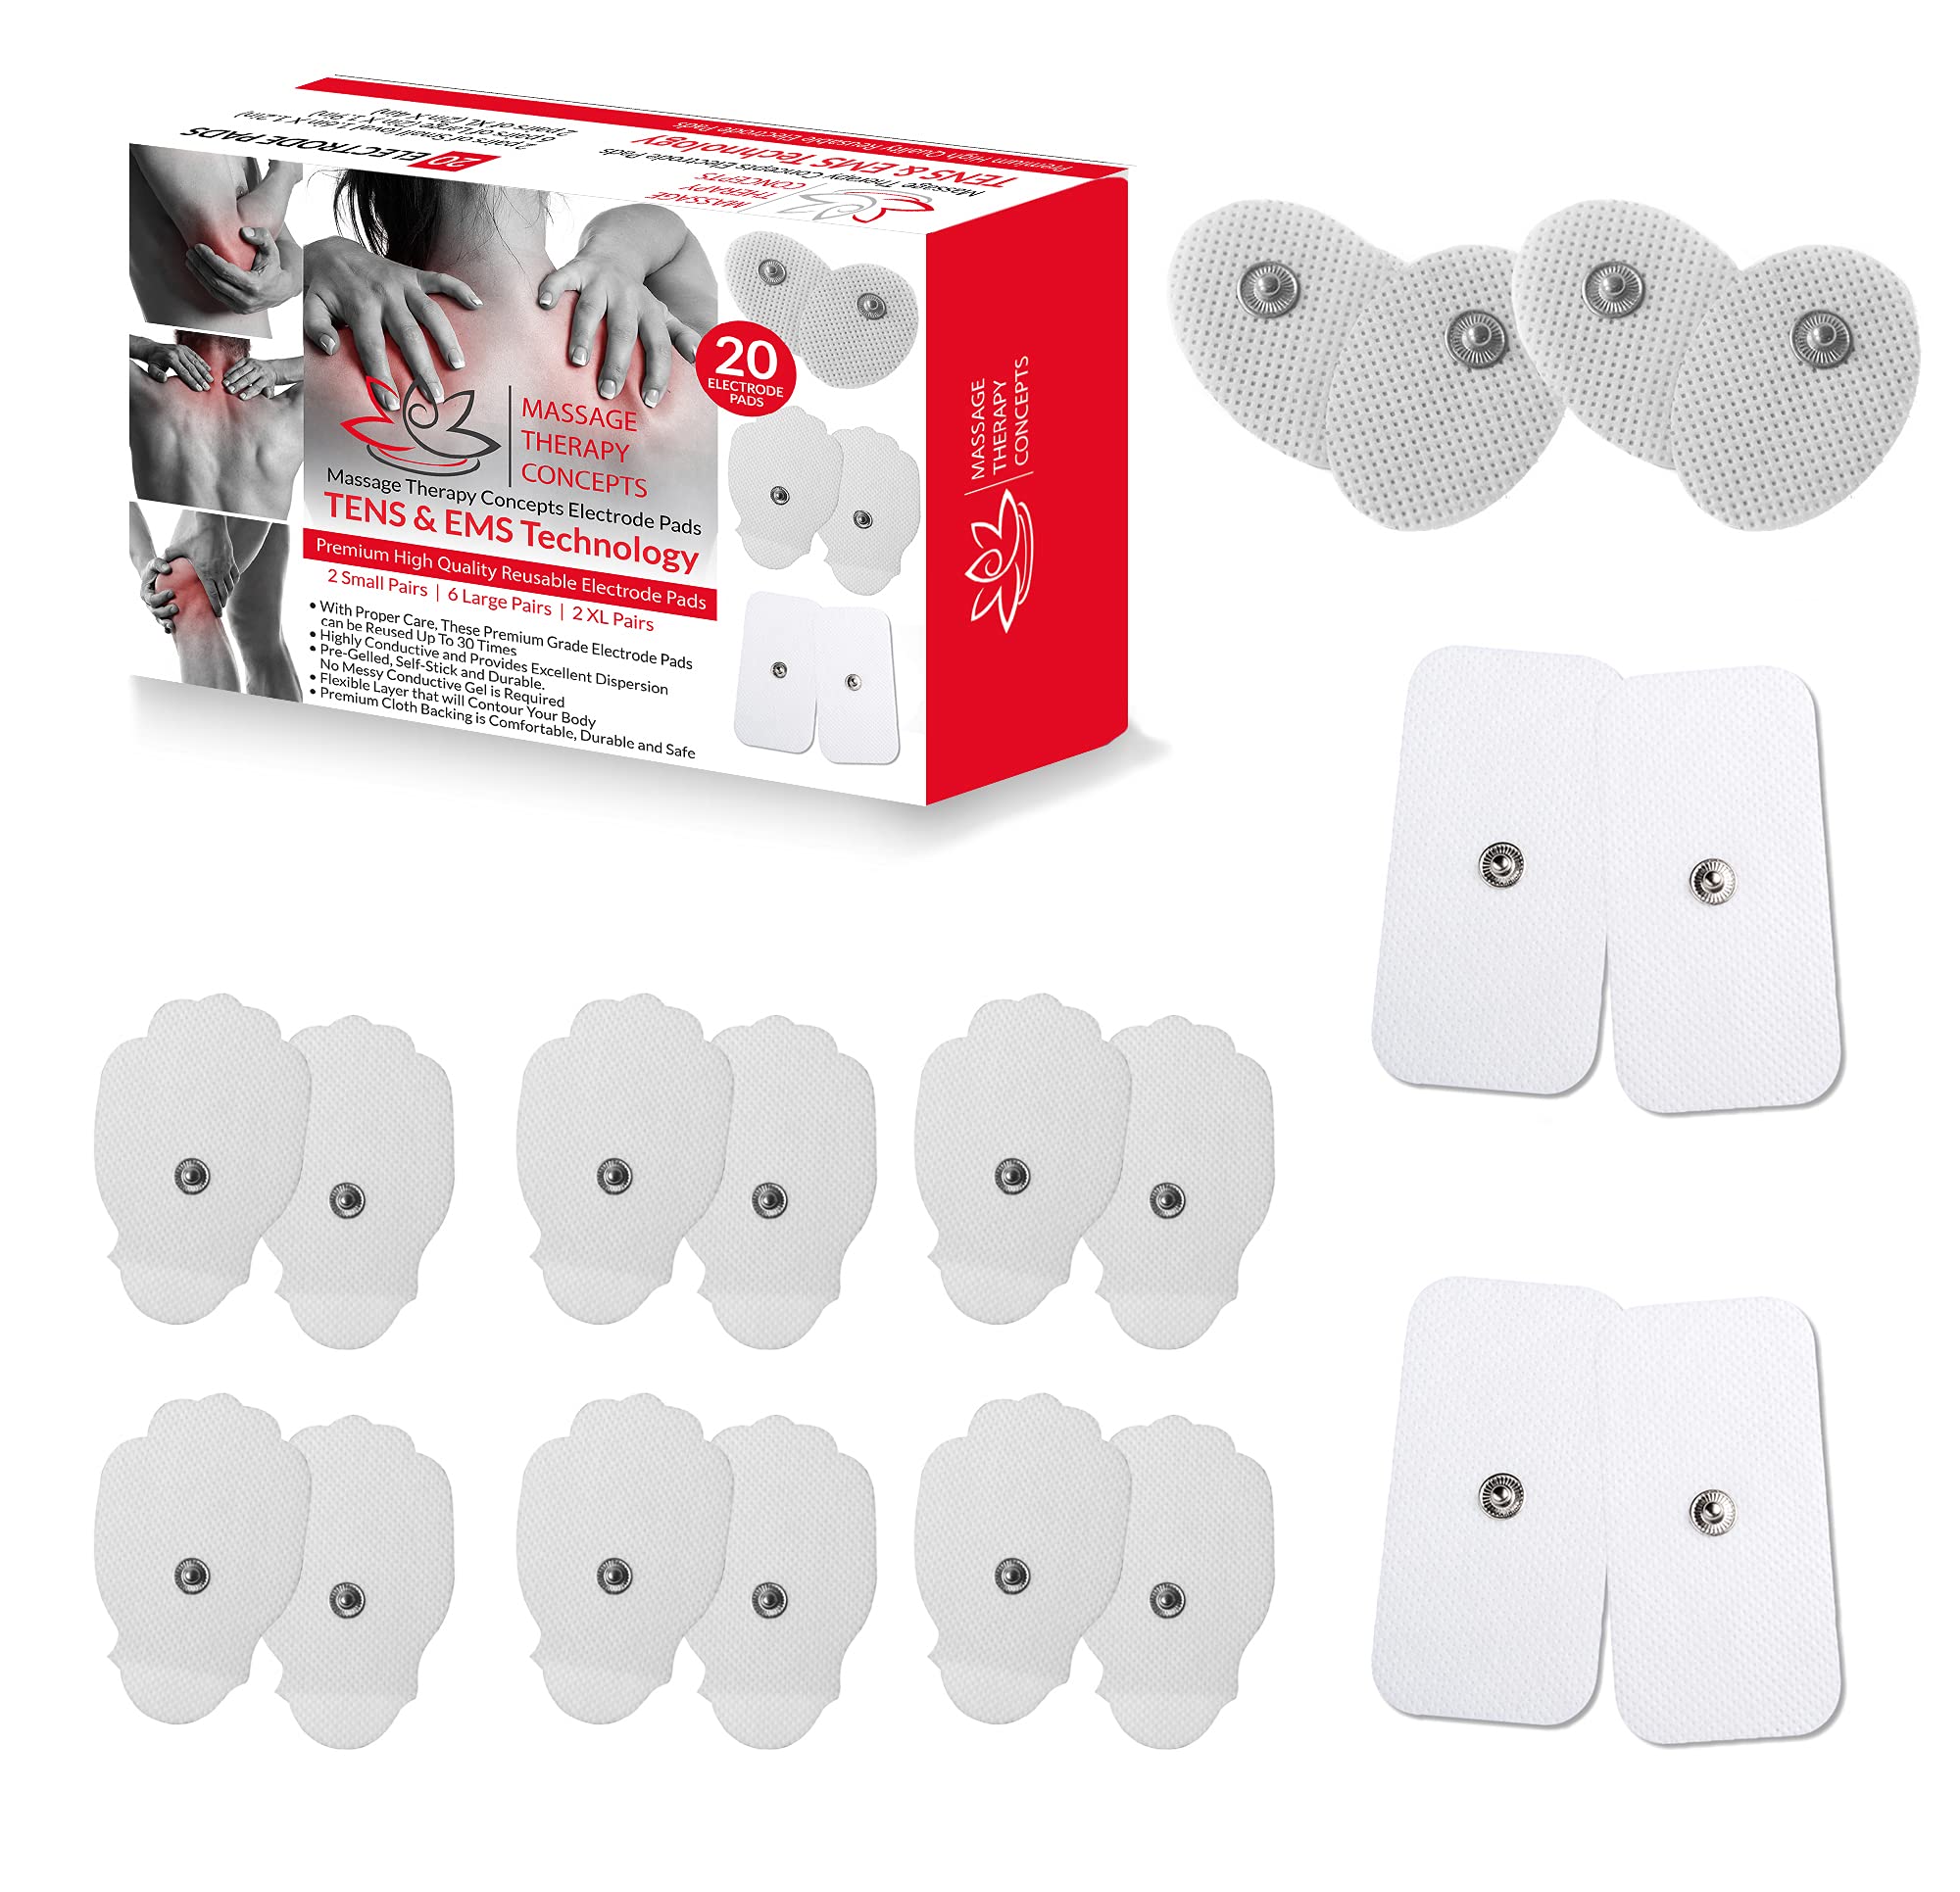 TENS Unit Pads - Premium Quality Snap Replacement Electrodes for TENS and  EMS Electrotherapy - Self Adhesive Reusable Patches up to 30 Times (20 Pads)  Combo (S L XL) 20 Piece Set